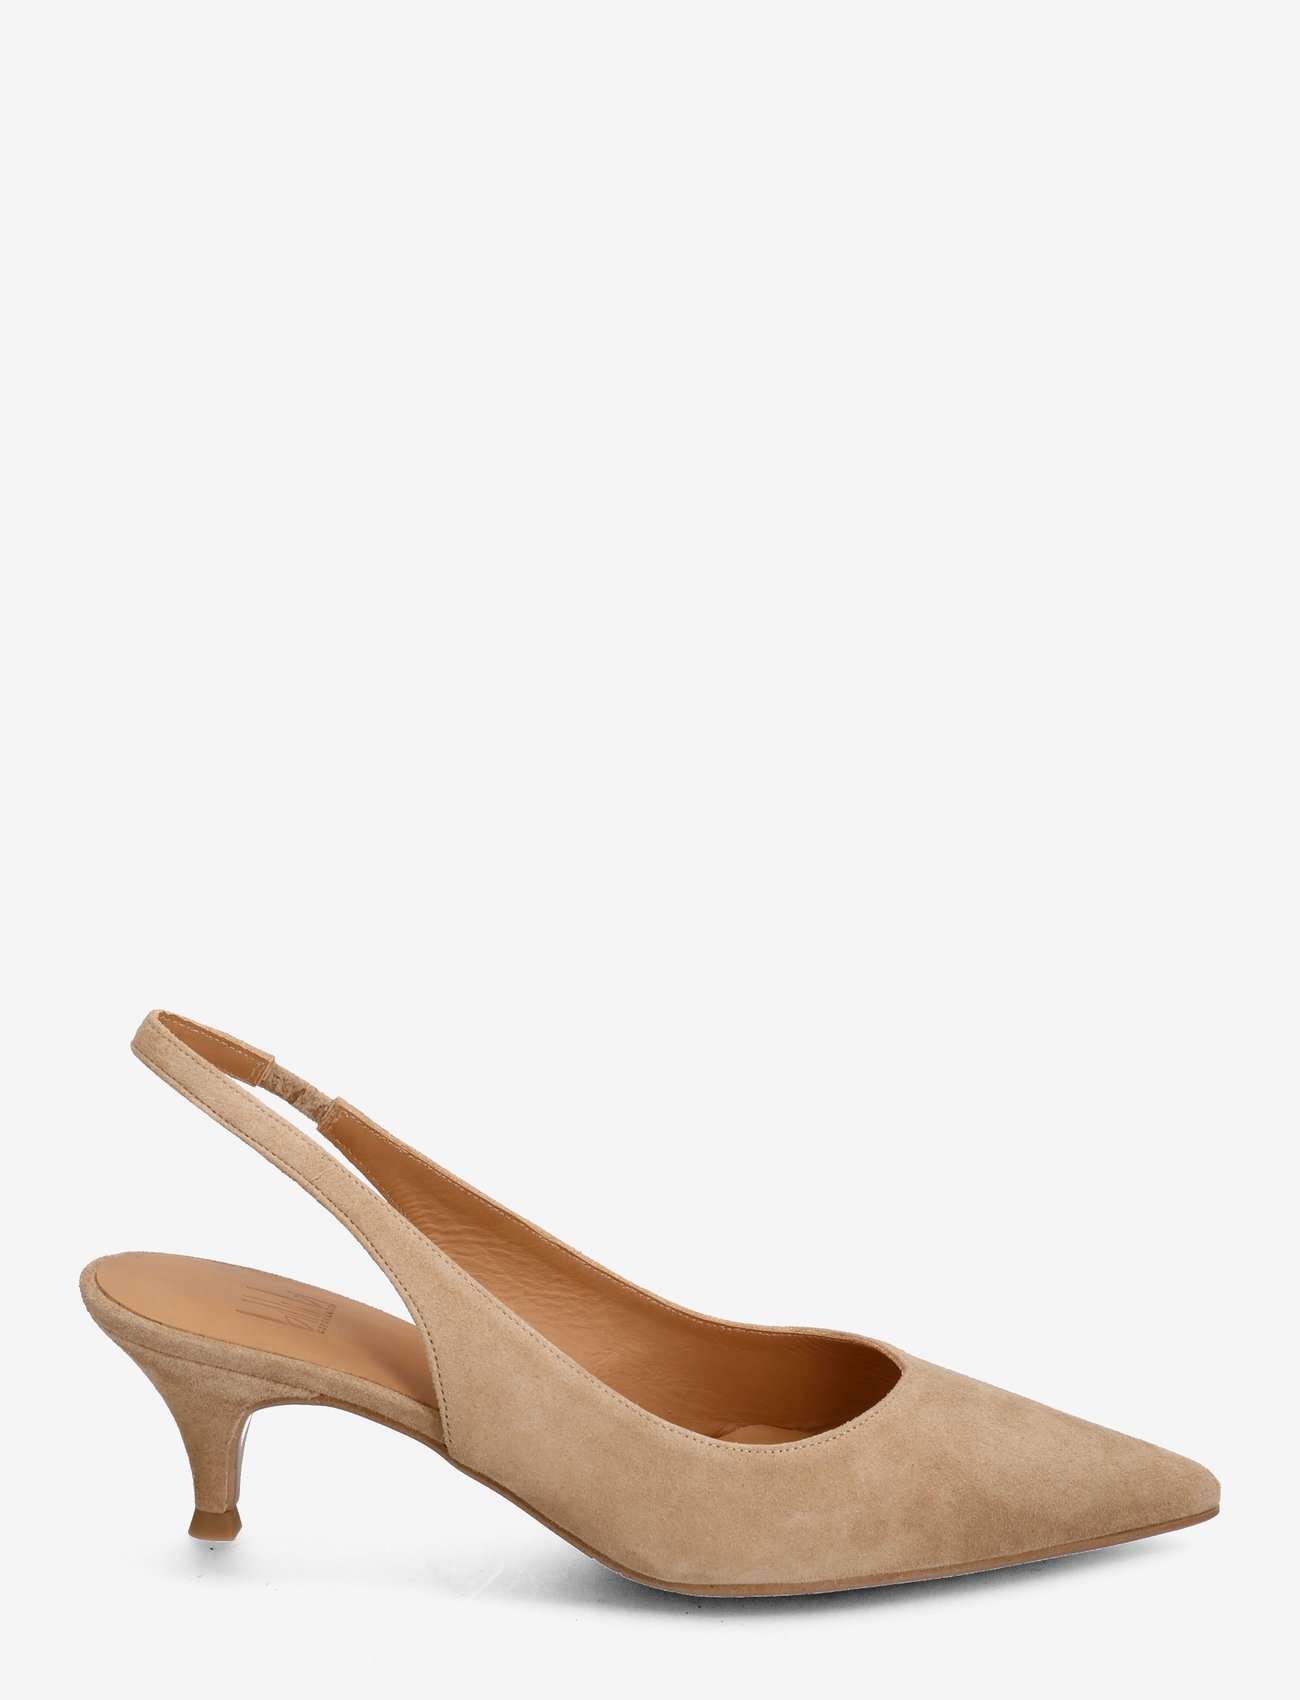 Billi Bi - Pumps - party wear at outlet prices - cuoio suede - 1